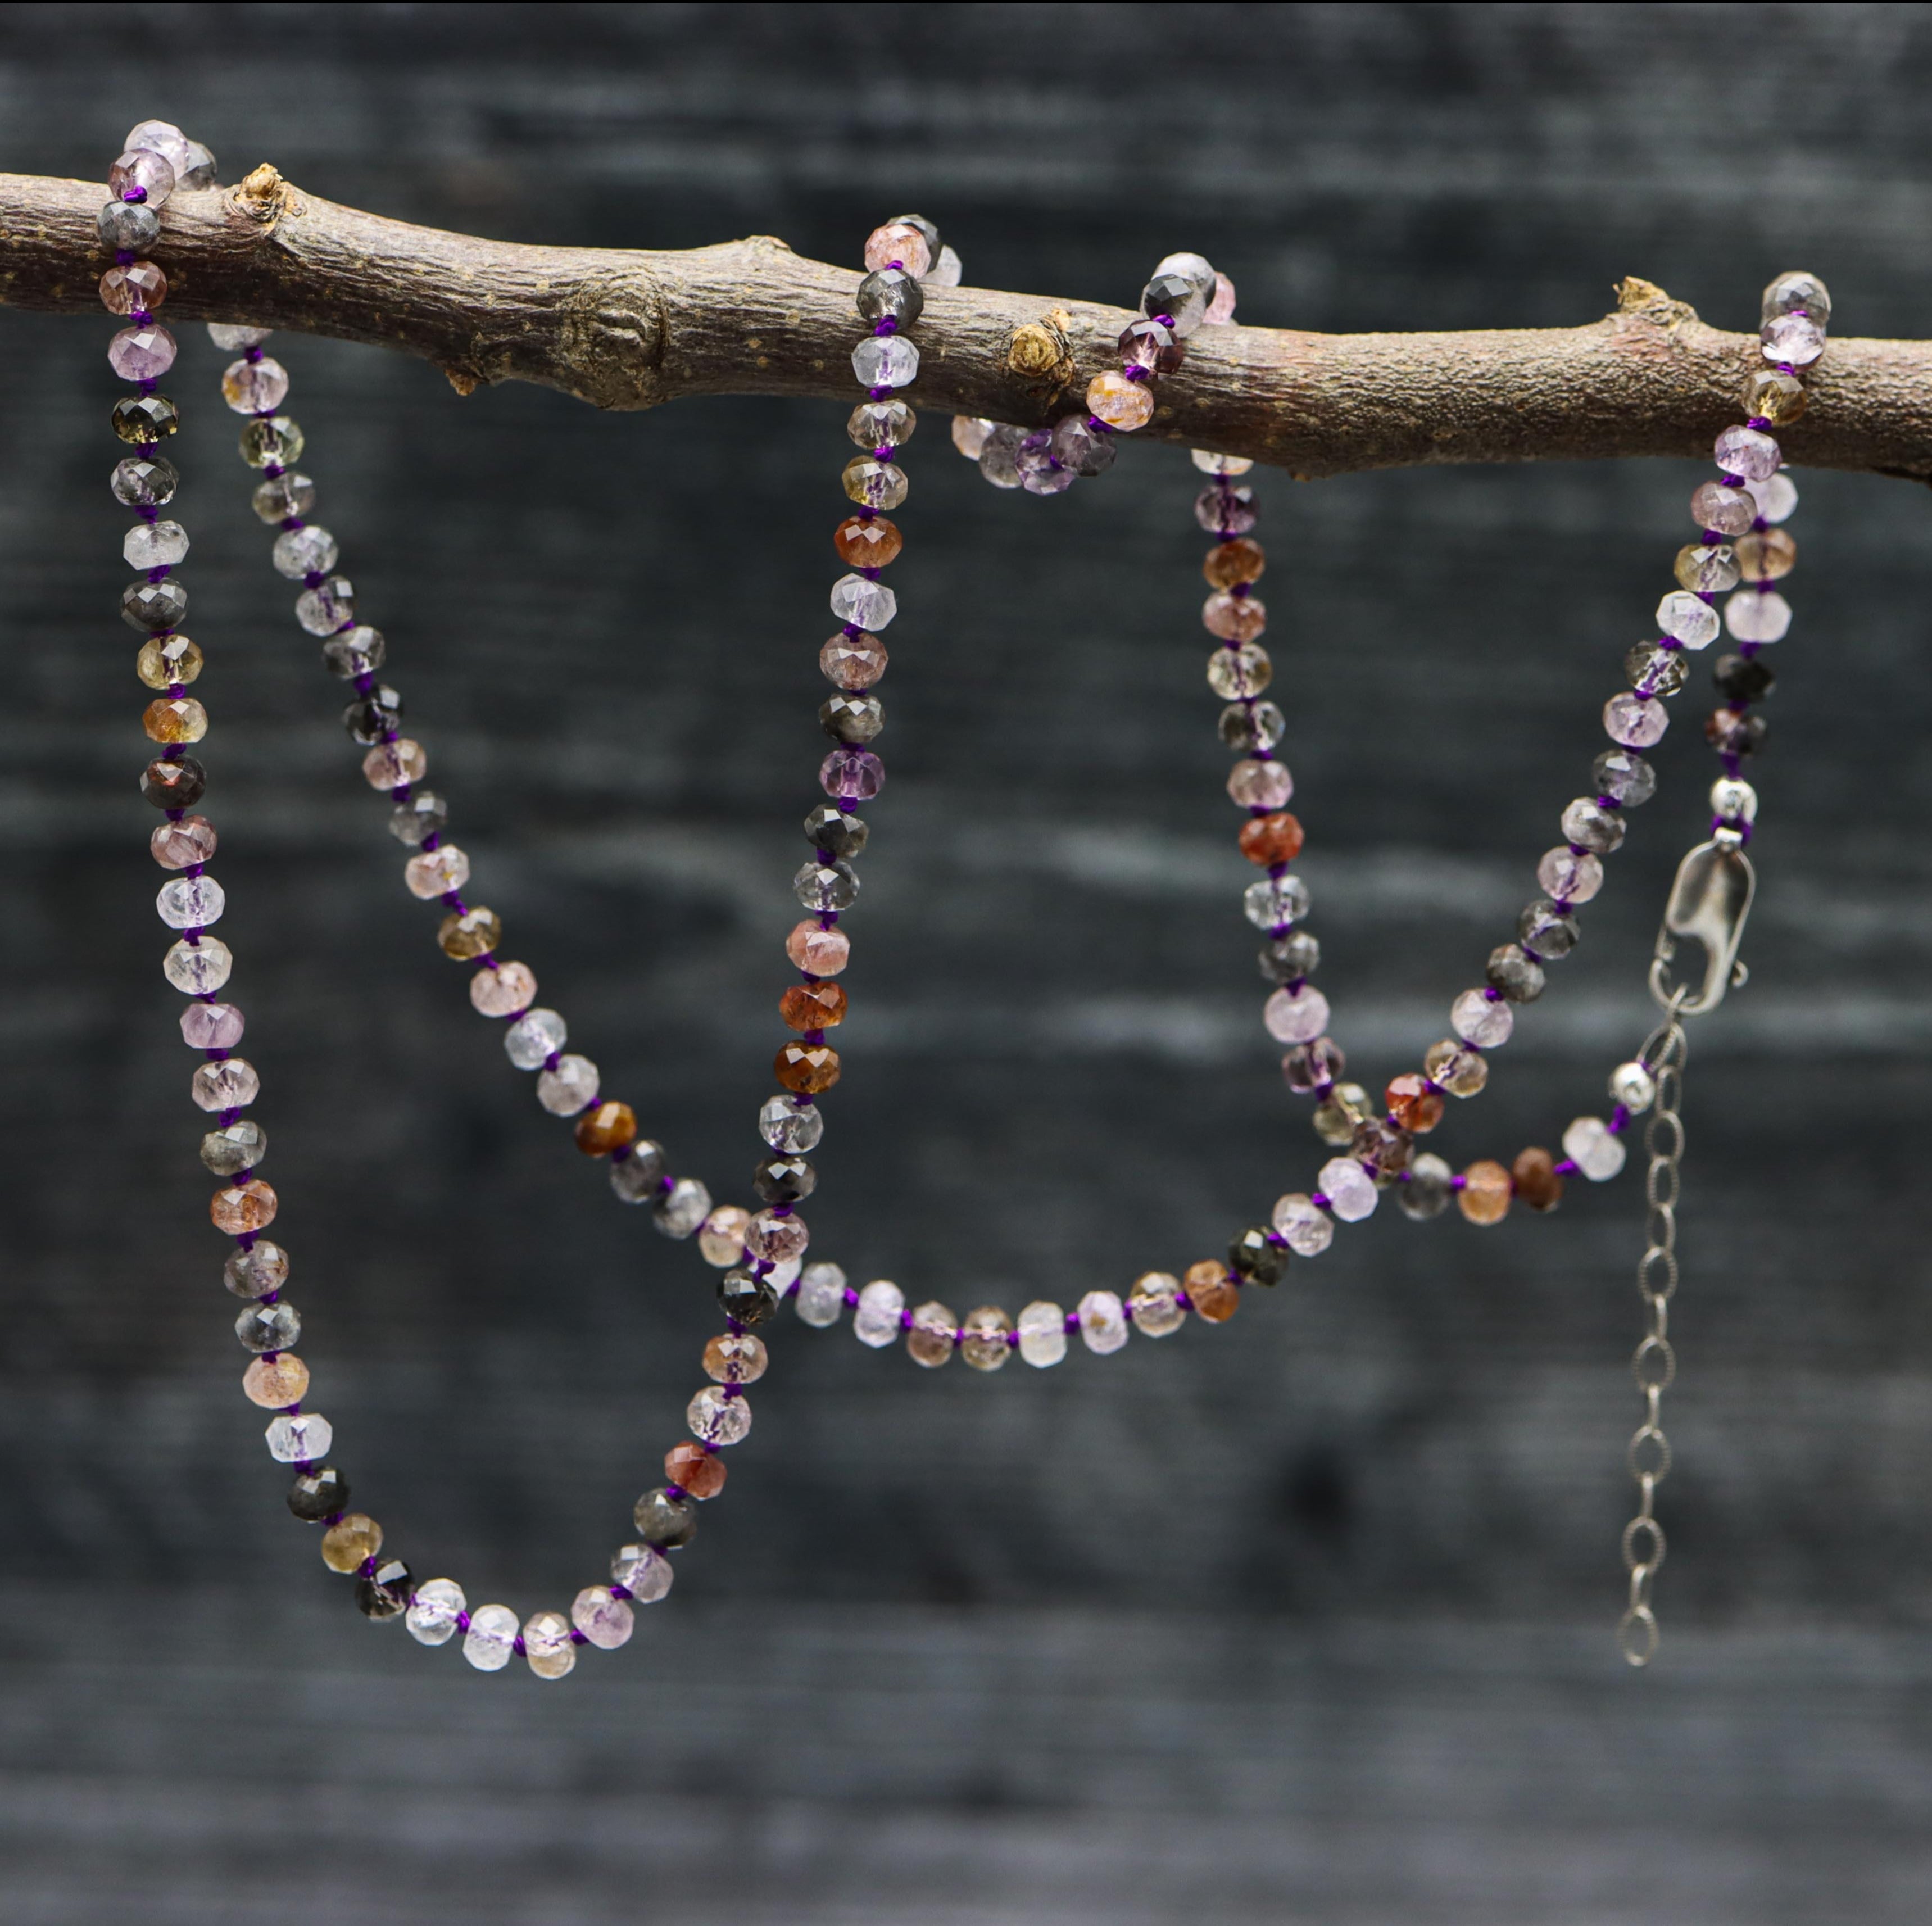 Super Seven Hand Knotted Bead Necklace Sterling Silver